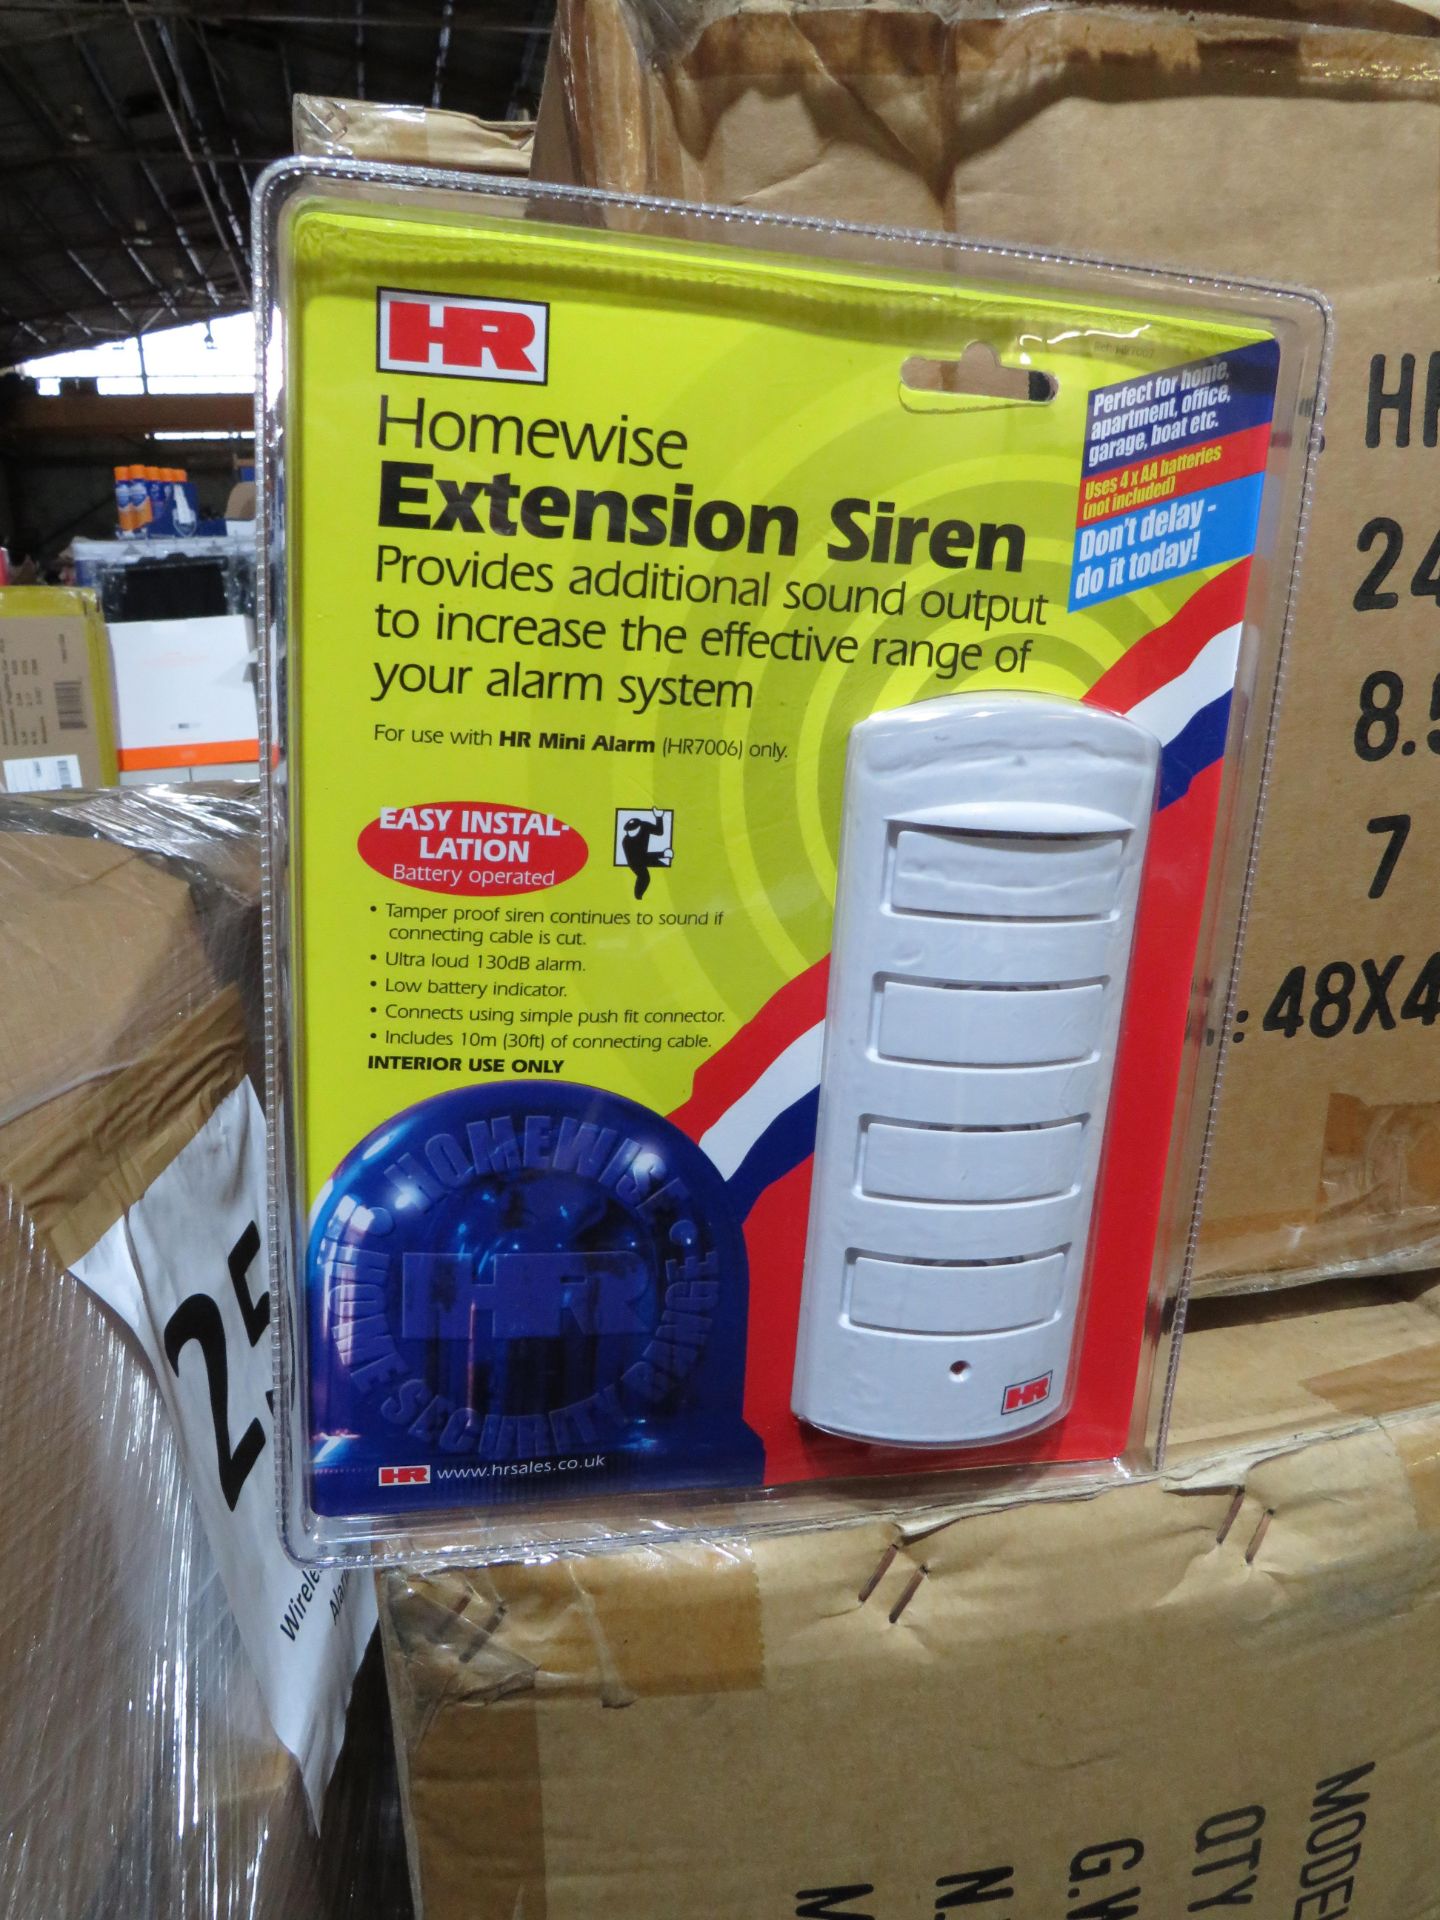 Box of 24x Home wise Extension sirens, still sealed in packaging